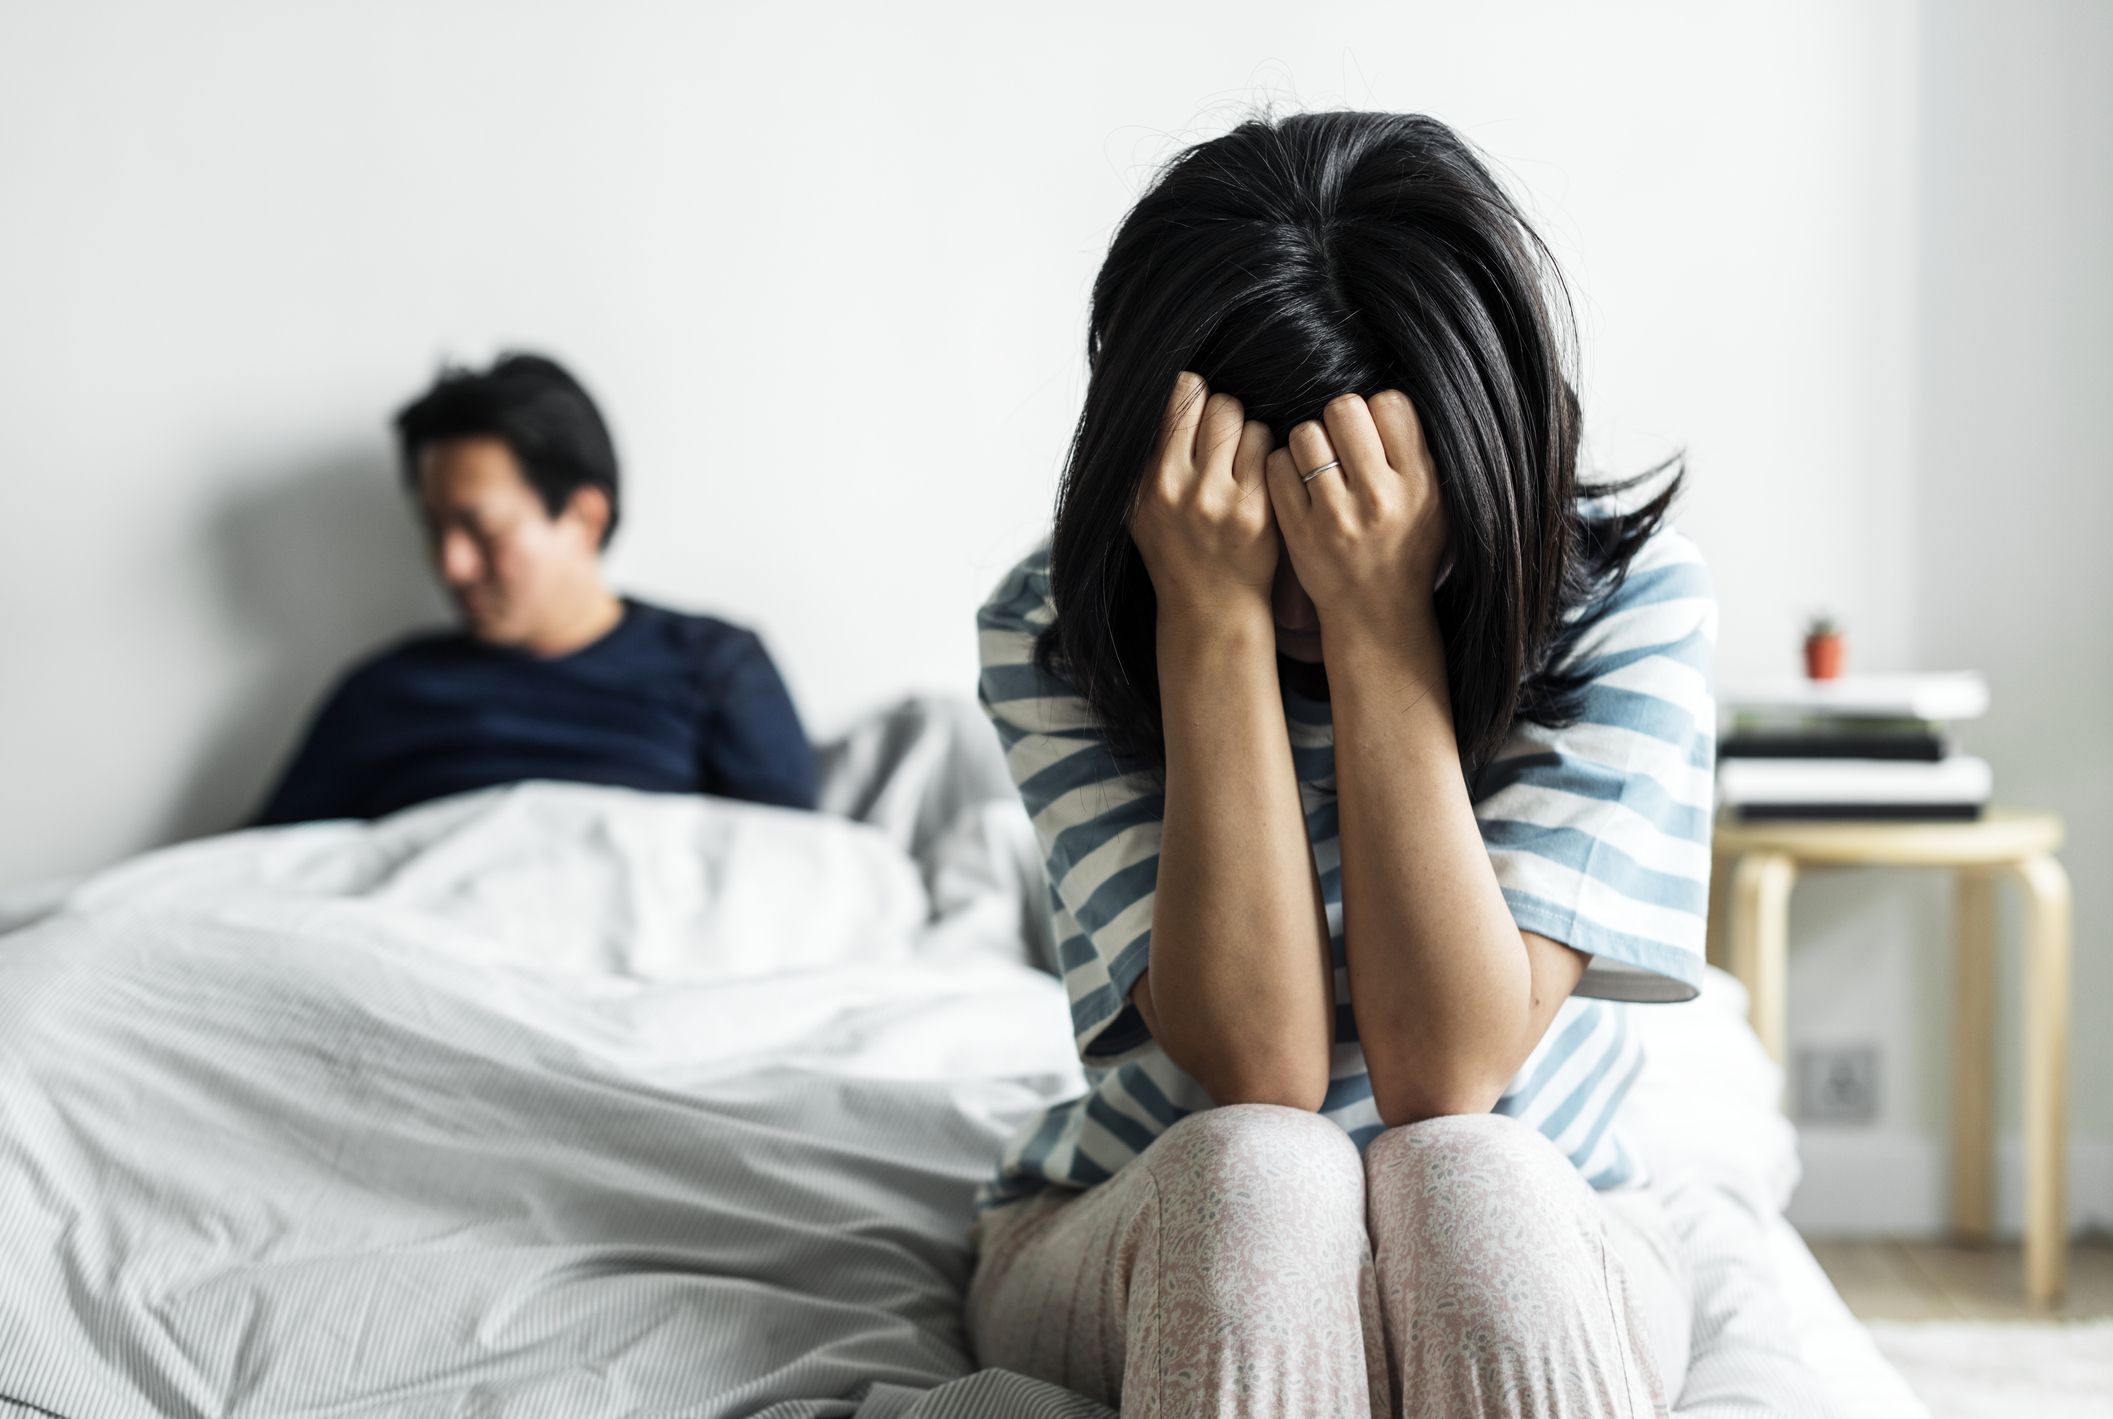 Relationship anxiety: 15 signs you have it and how to handle it